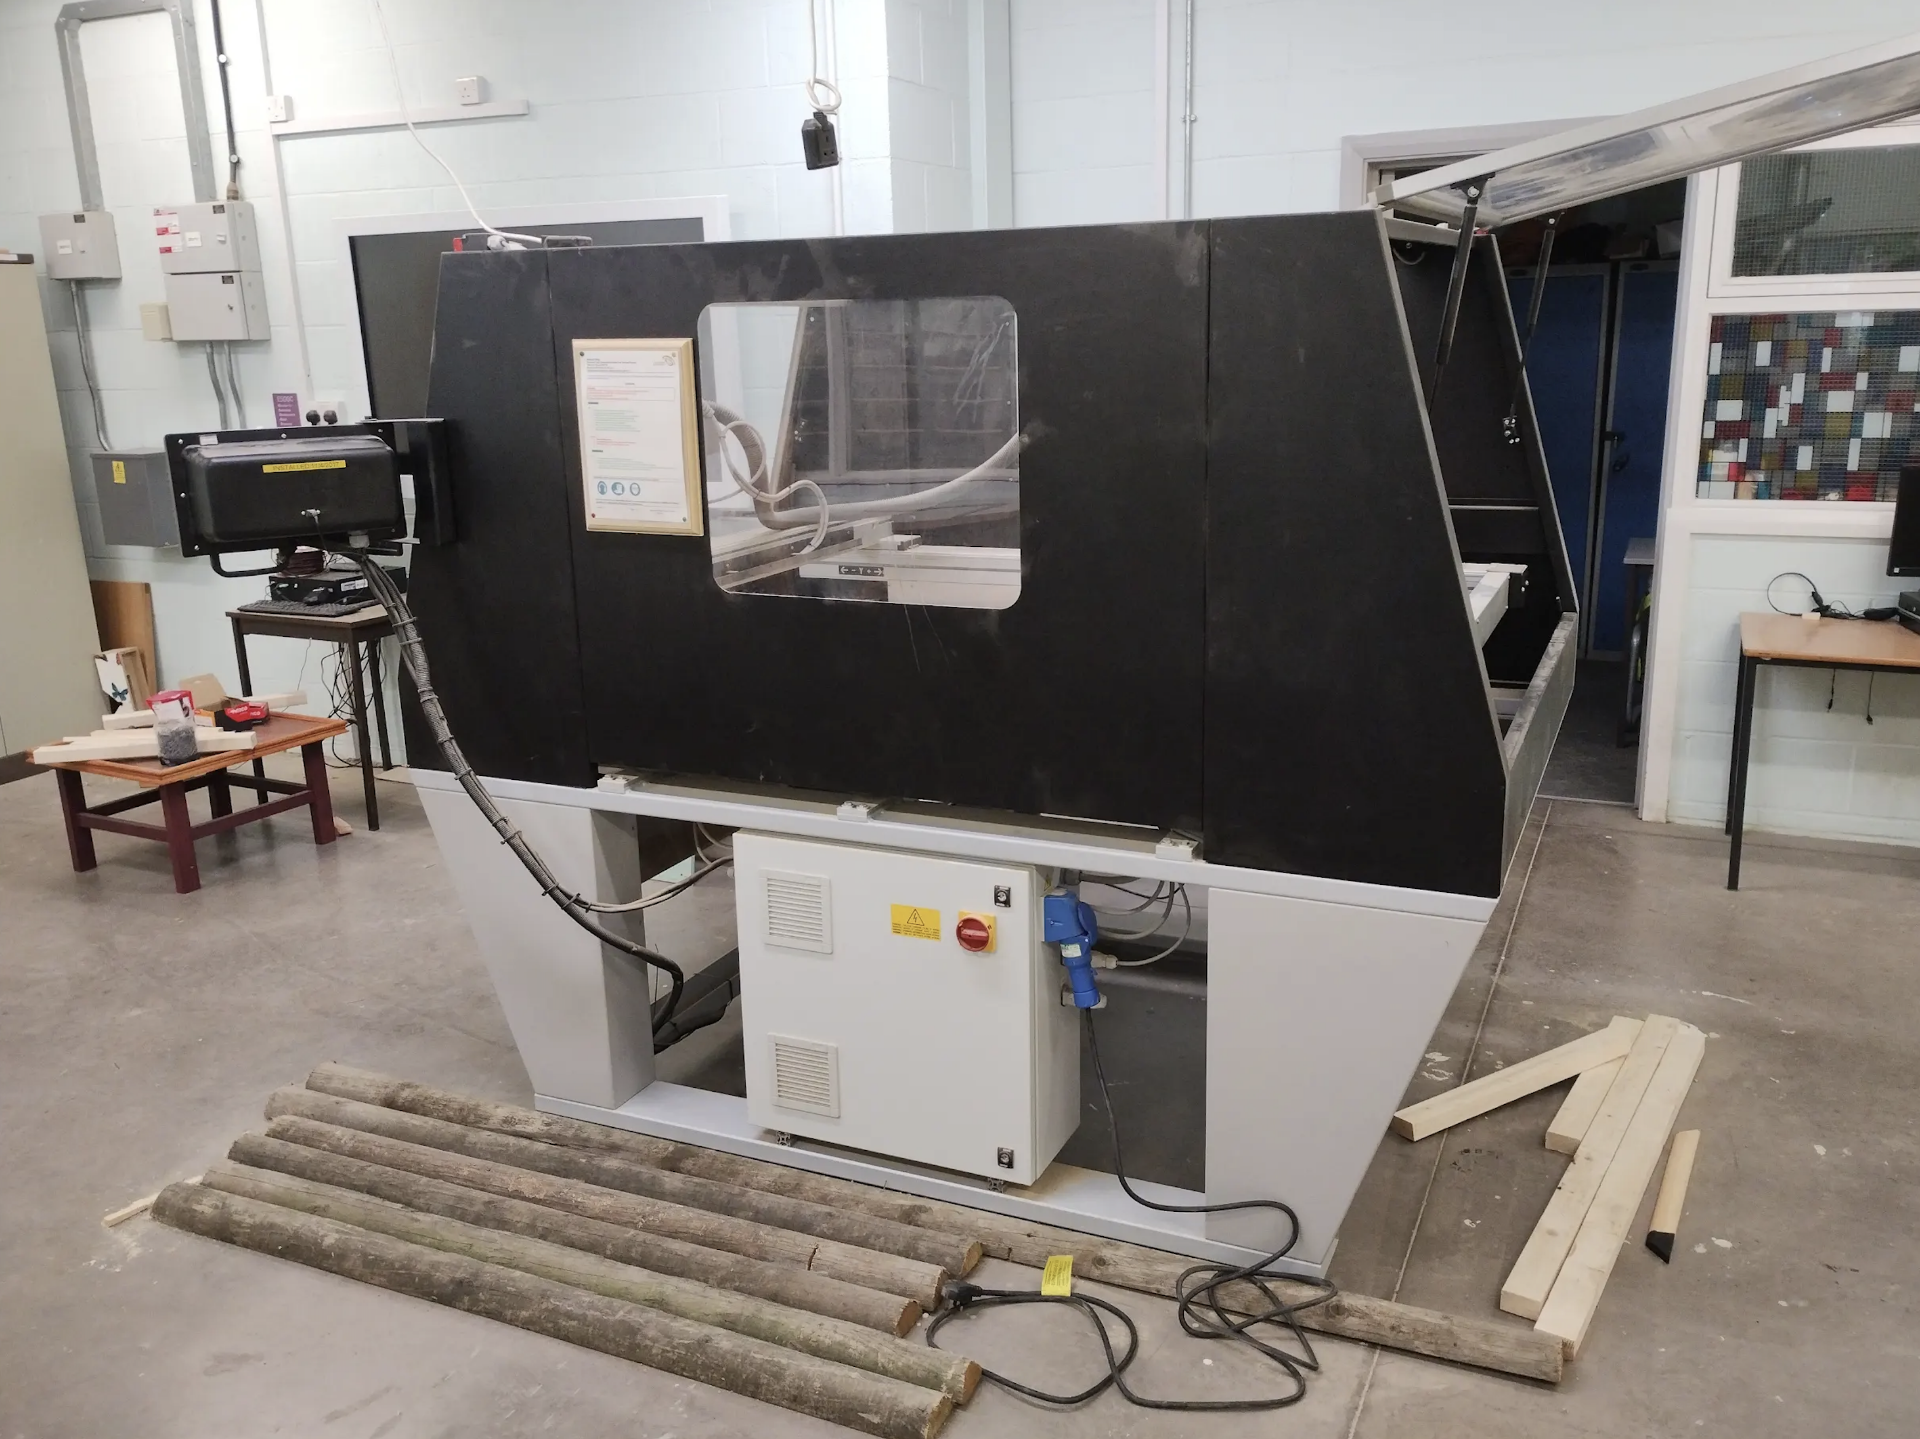 Trend Smartfast CNC Carpentry Router (Approx. 6 yrs old) Ref: 7045-0317-SK01 - Image 9 of 10